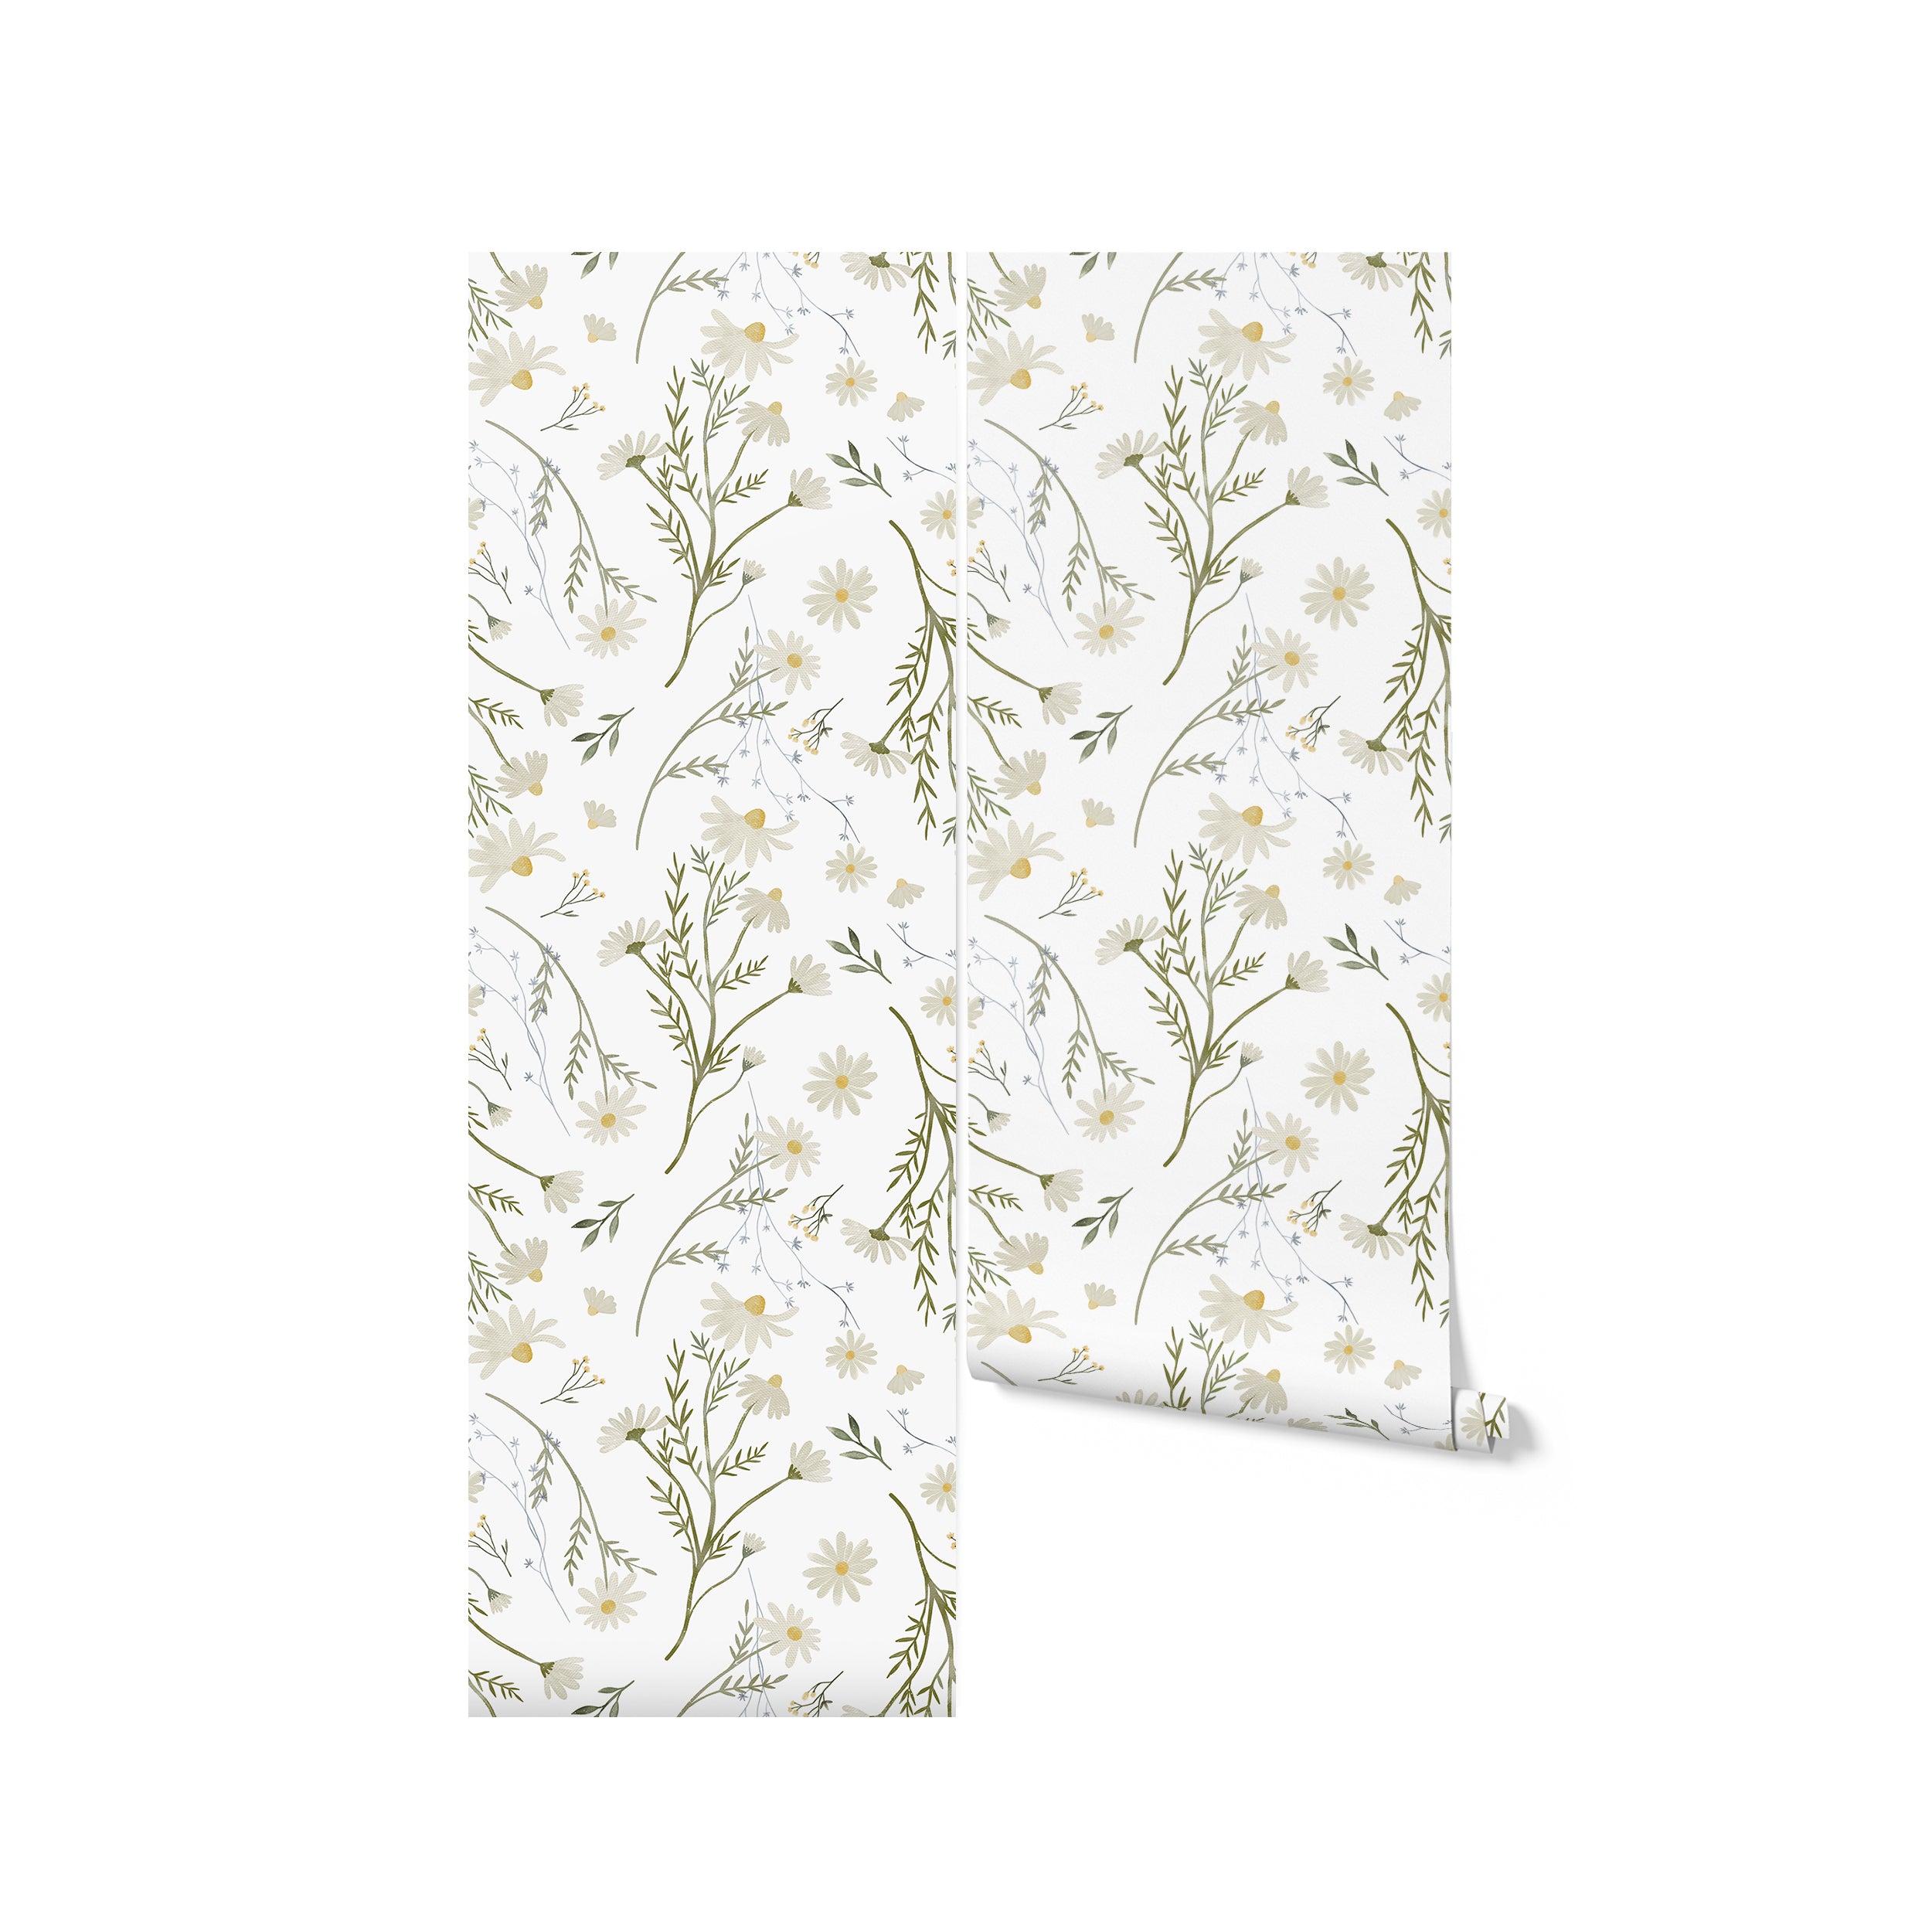 A rolled-up view of the Daisy Bouquet Wallpaper illustrating the wallpaper's texture and pattern, with daisy flowers and greenery on a clean white background, suggesting the wallpaper's readiness for installation in a light and airy interior space.